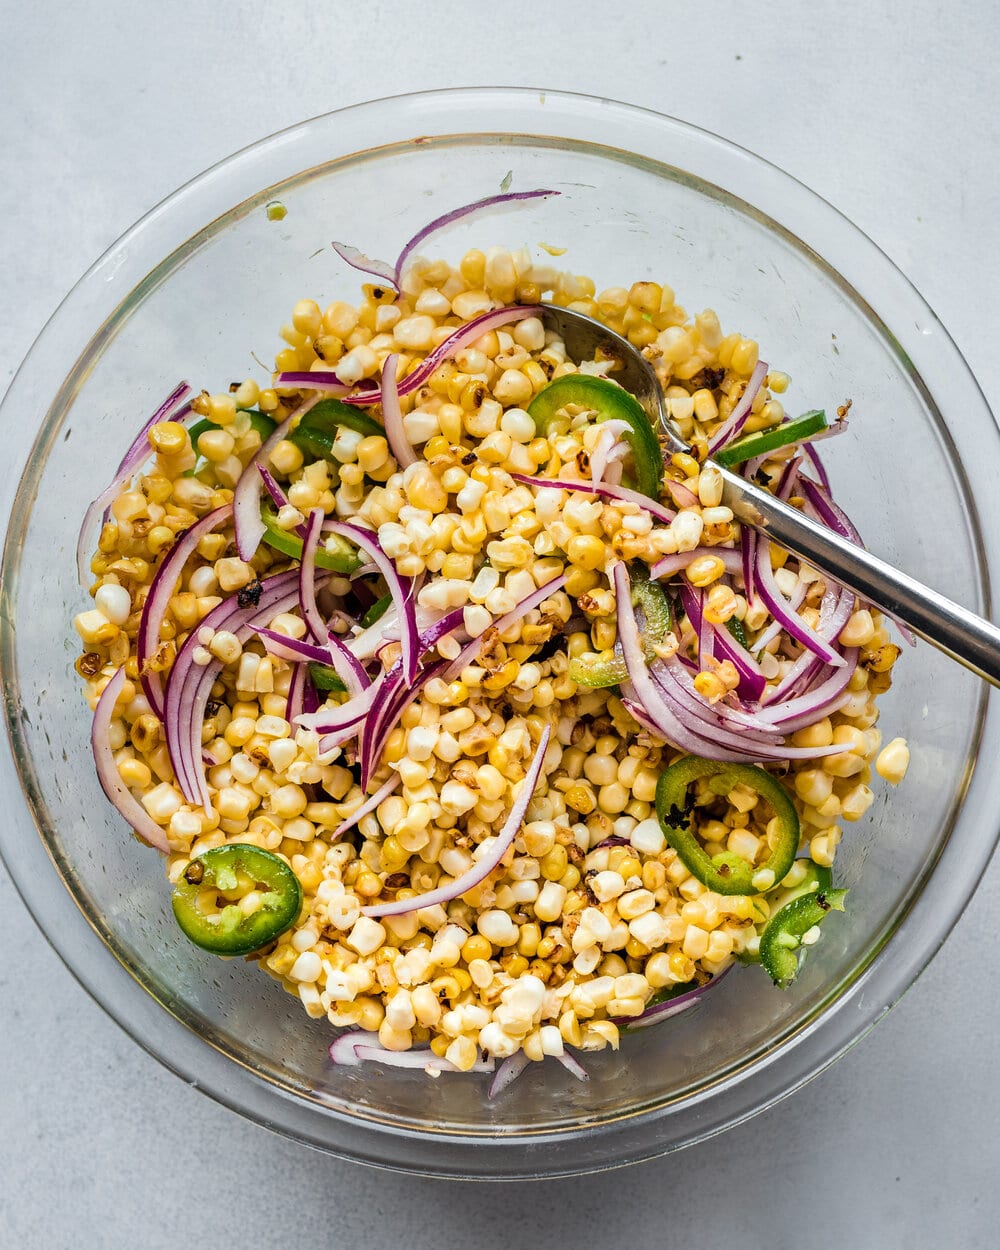 Charred corn mixed with onions